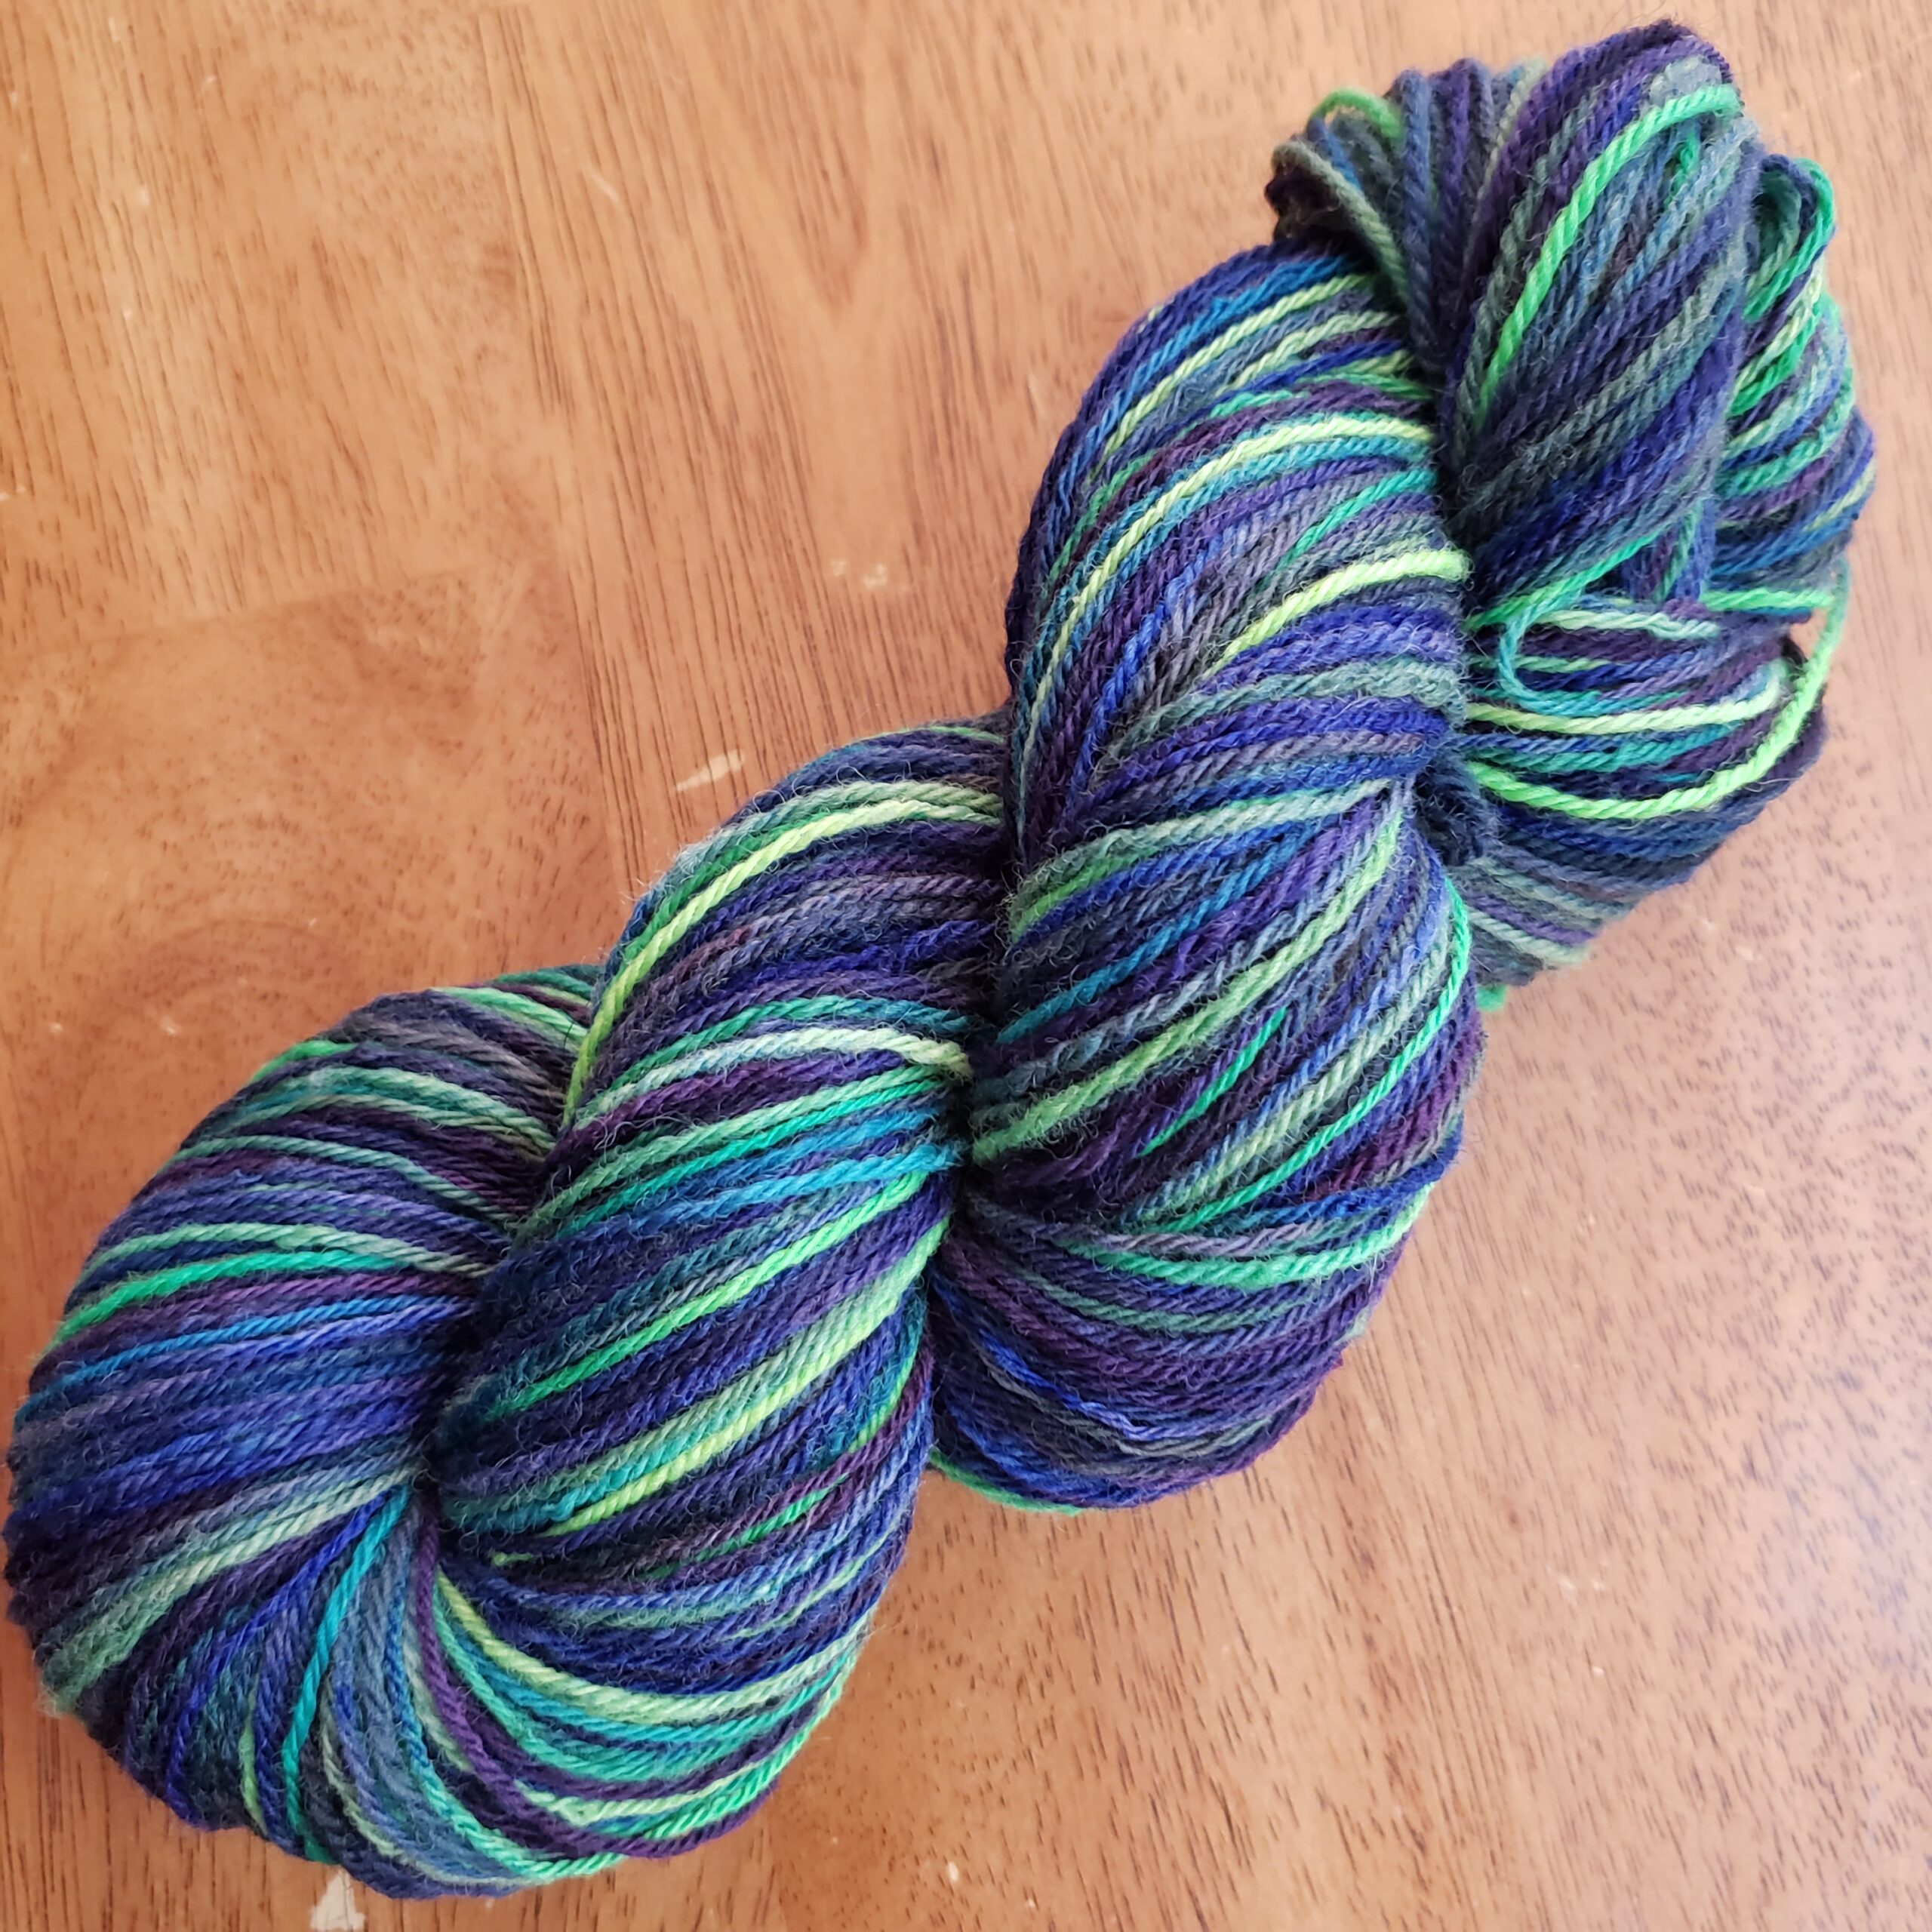 Sheep Fleece to Sock Yarn: Challenges and Results